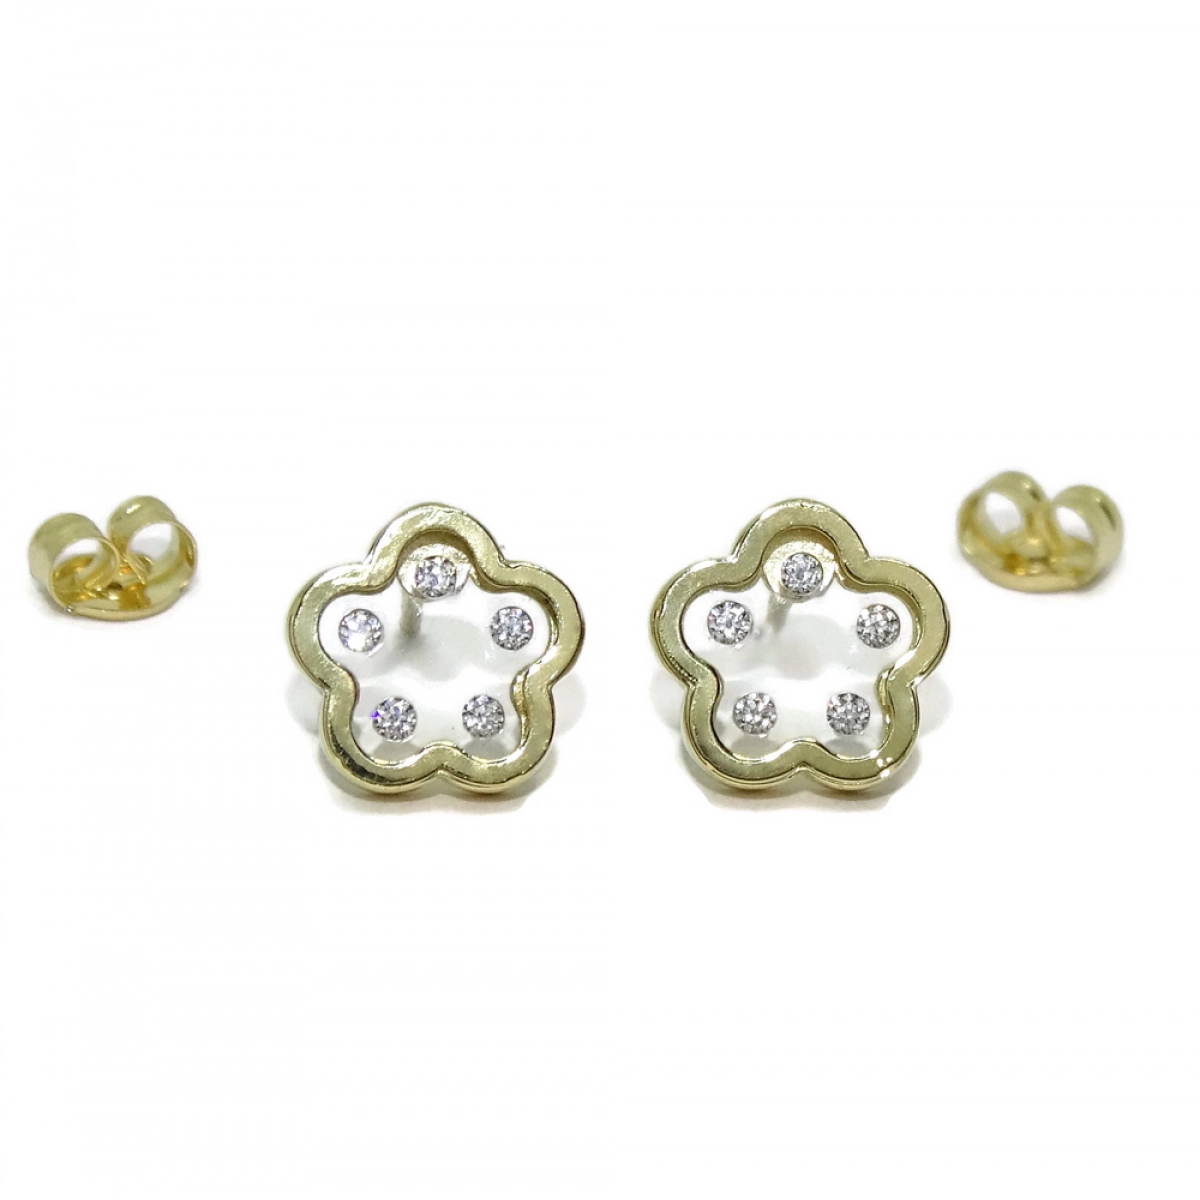 EARRINGS FLOWER 18K YELLOW GOLD WITH 10 ZIRCONS OF THE BEST QUALITY NEVER SAY NEVER